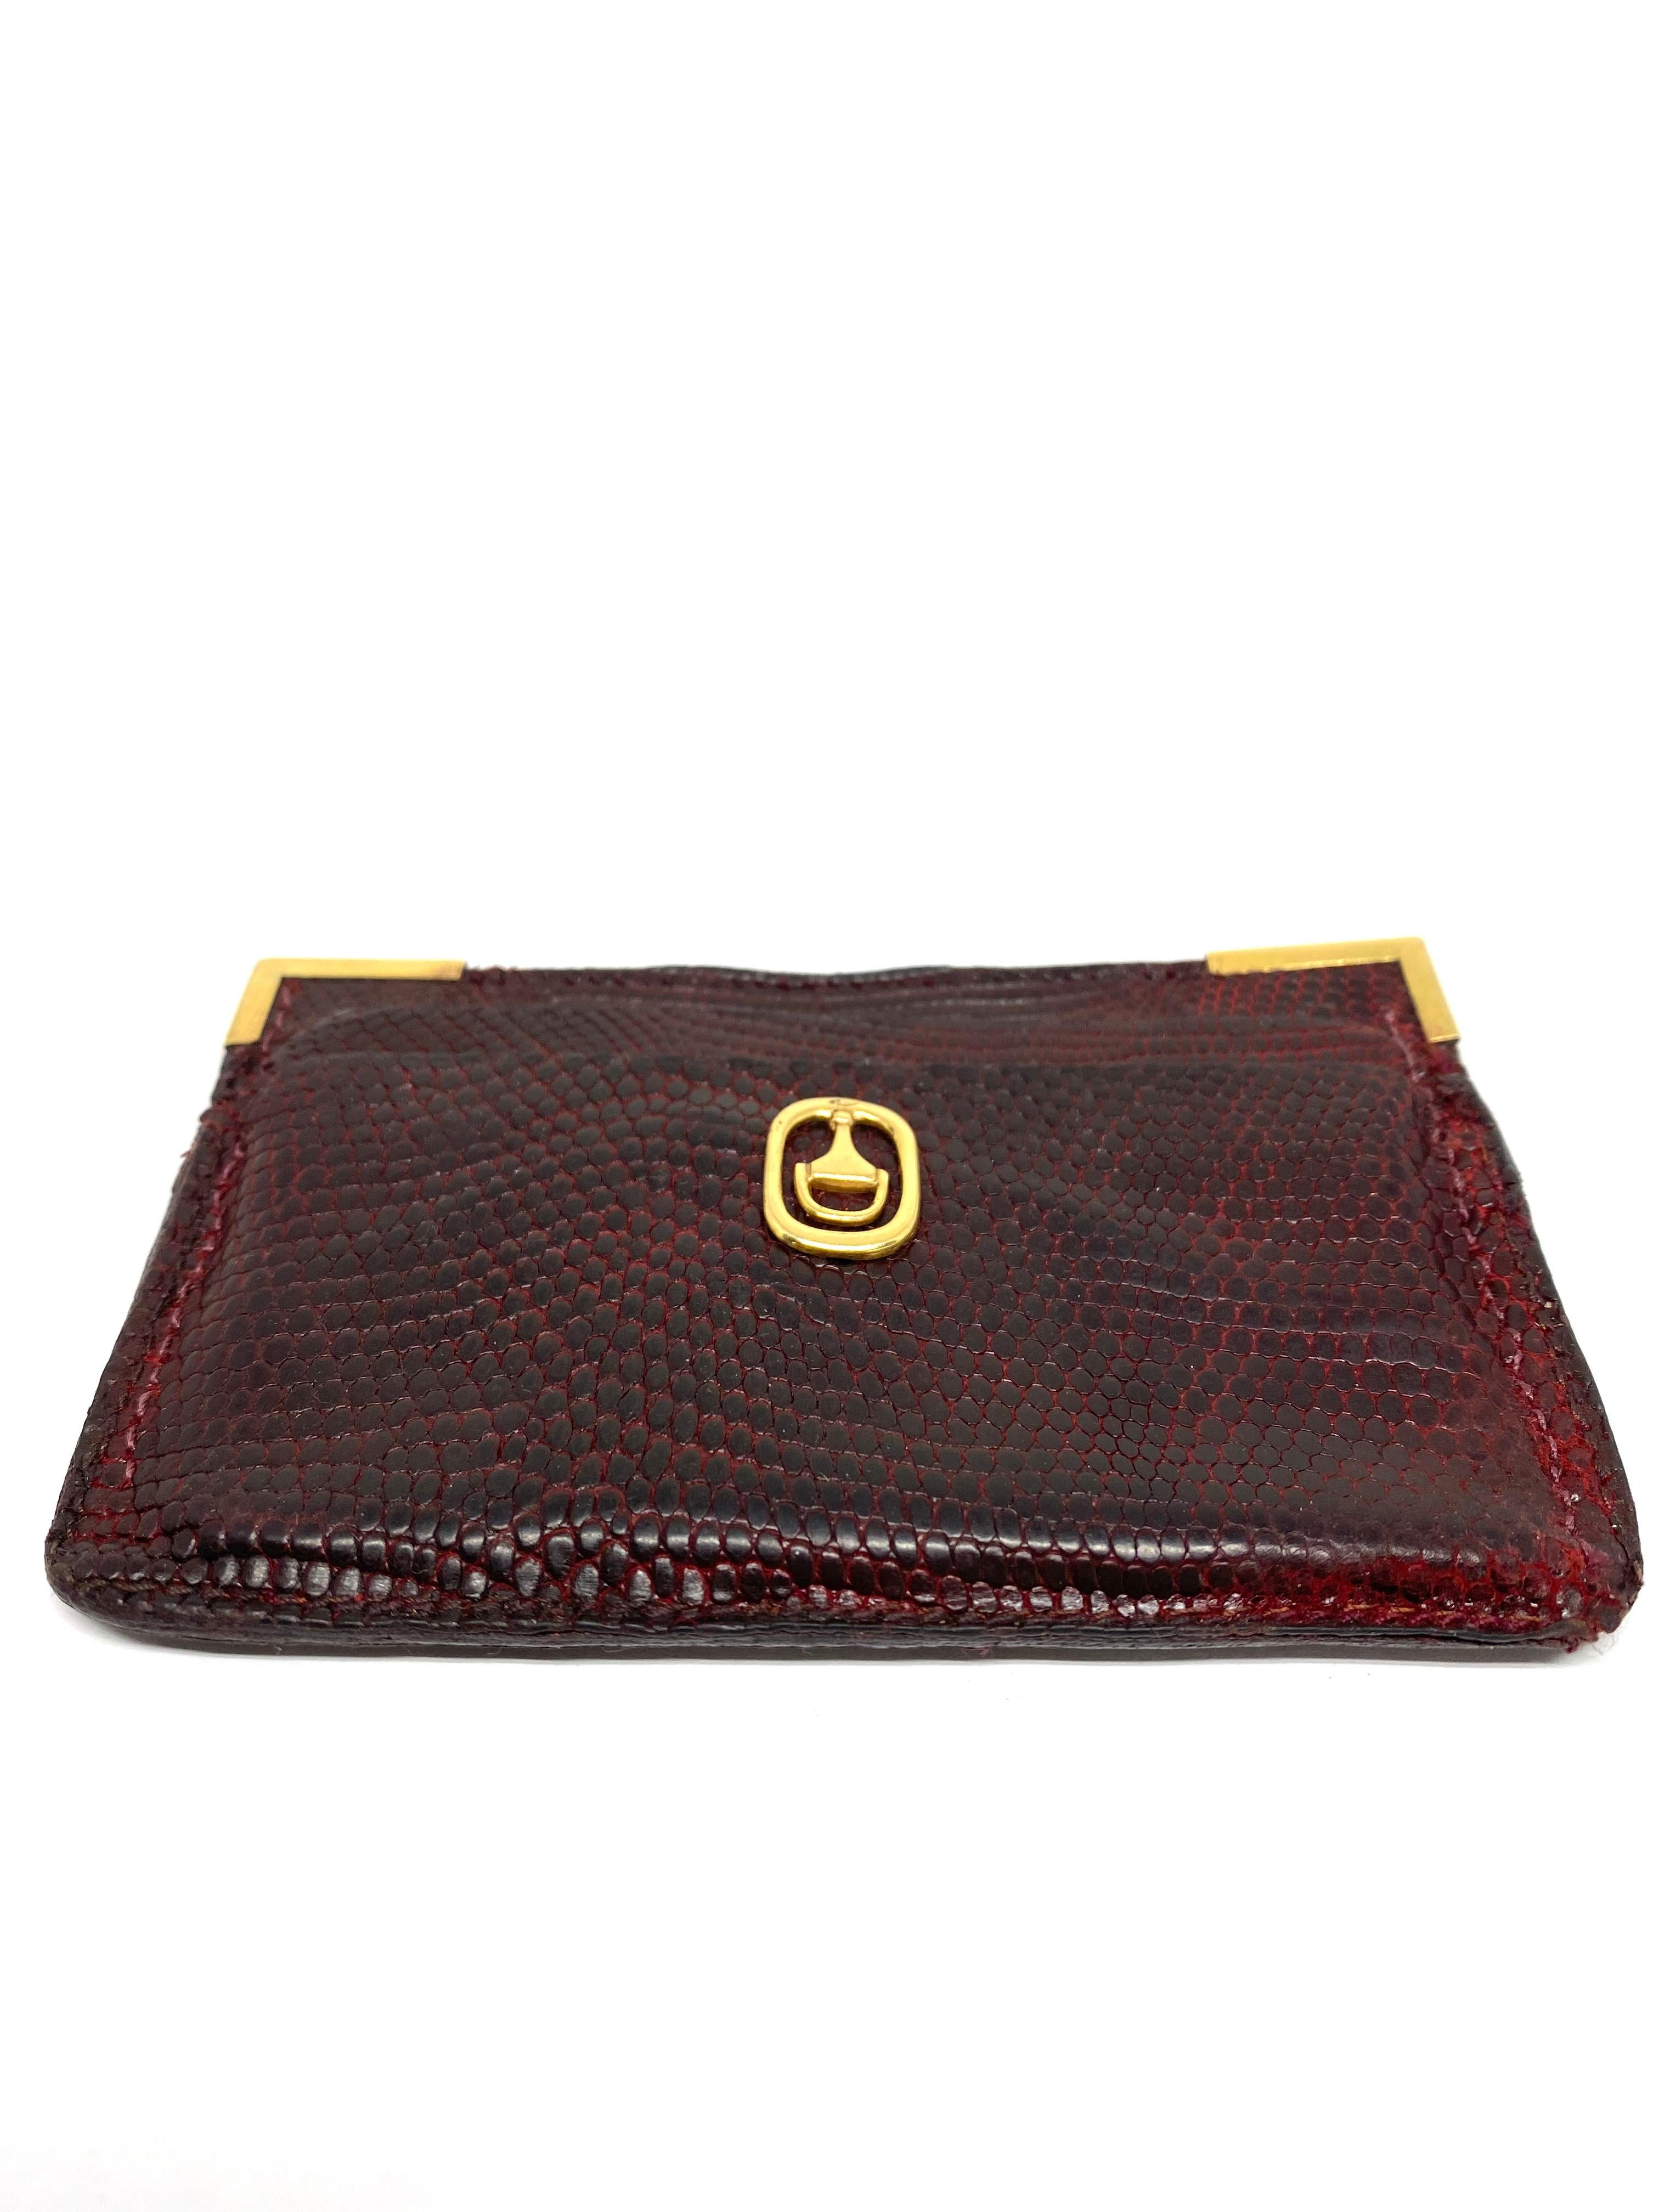 
1970s GUCCI Red Animal Skin and 18K Yellow Gold Card Holder Wallet

Product details:
Red/ burgundy animal skin card holder wallet 
Fits four cards, two on each side 
All the hardware is 18K yellow gold
Featuring 18k yellow gold vintage Gucci logo